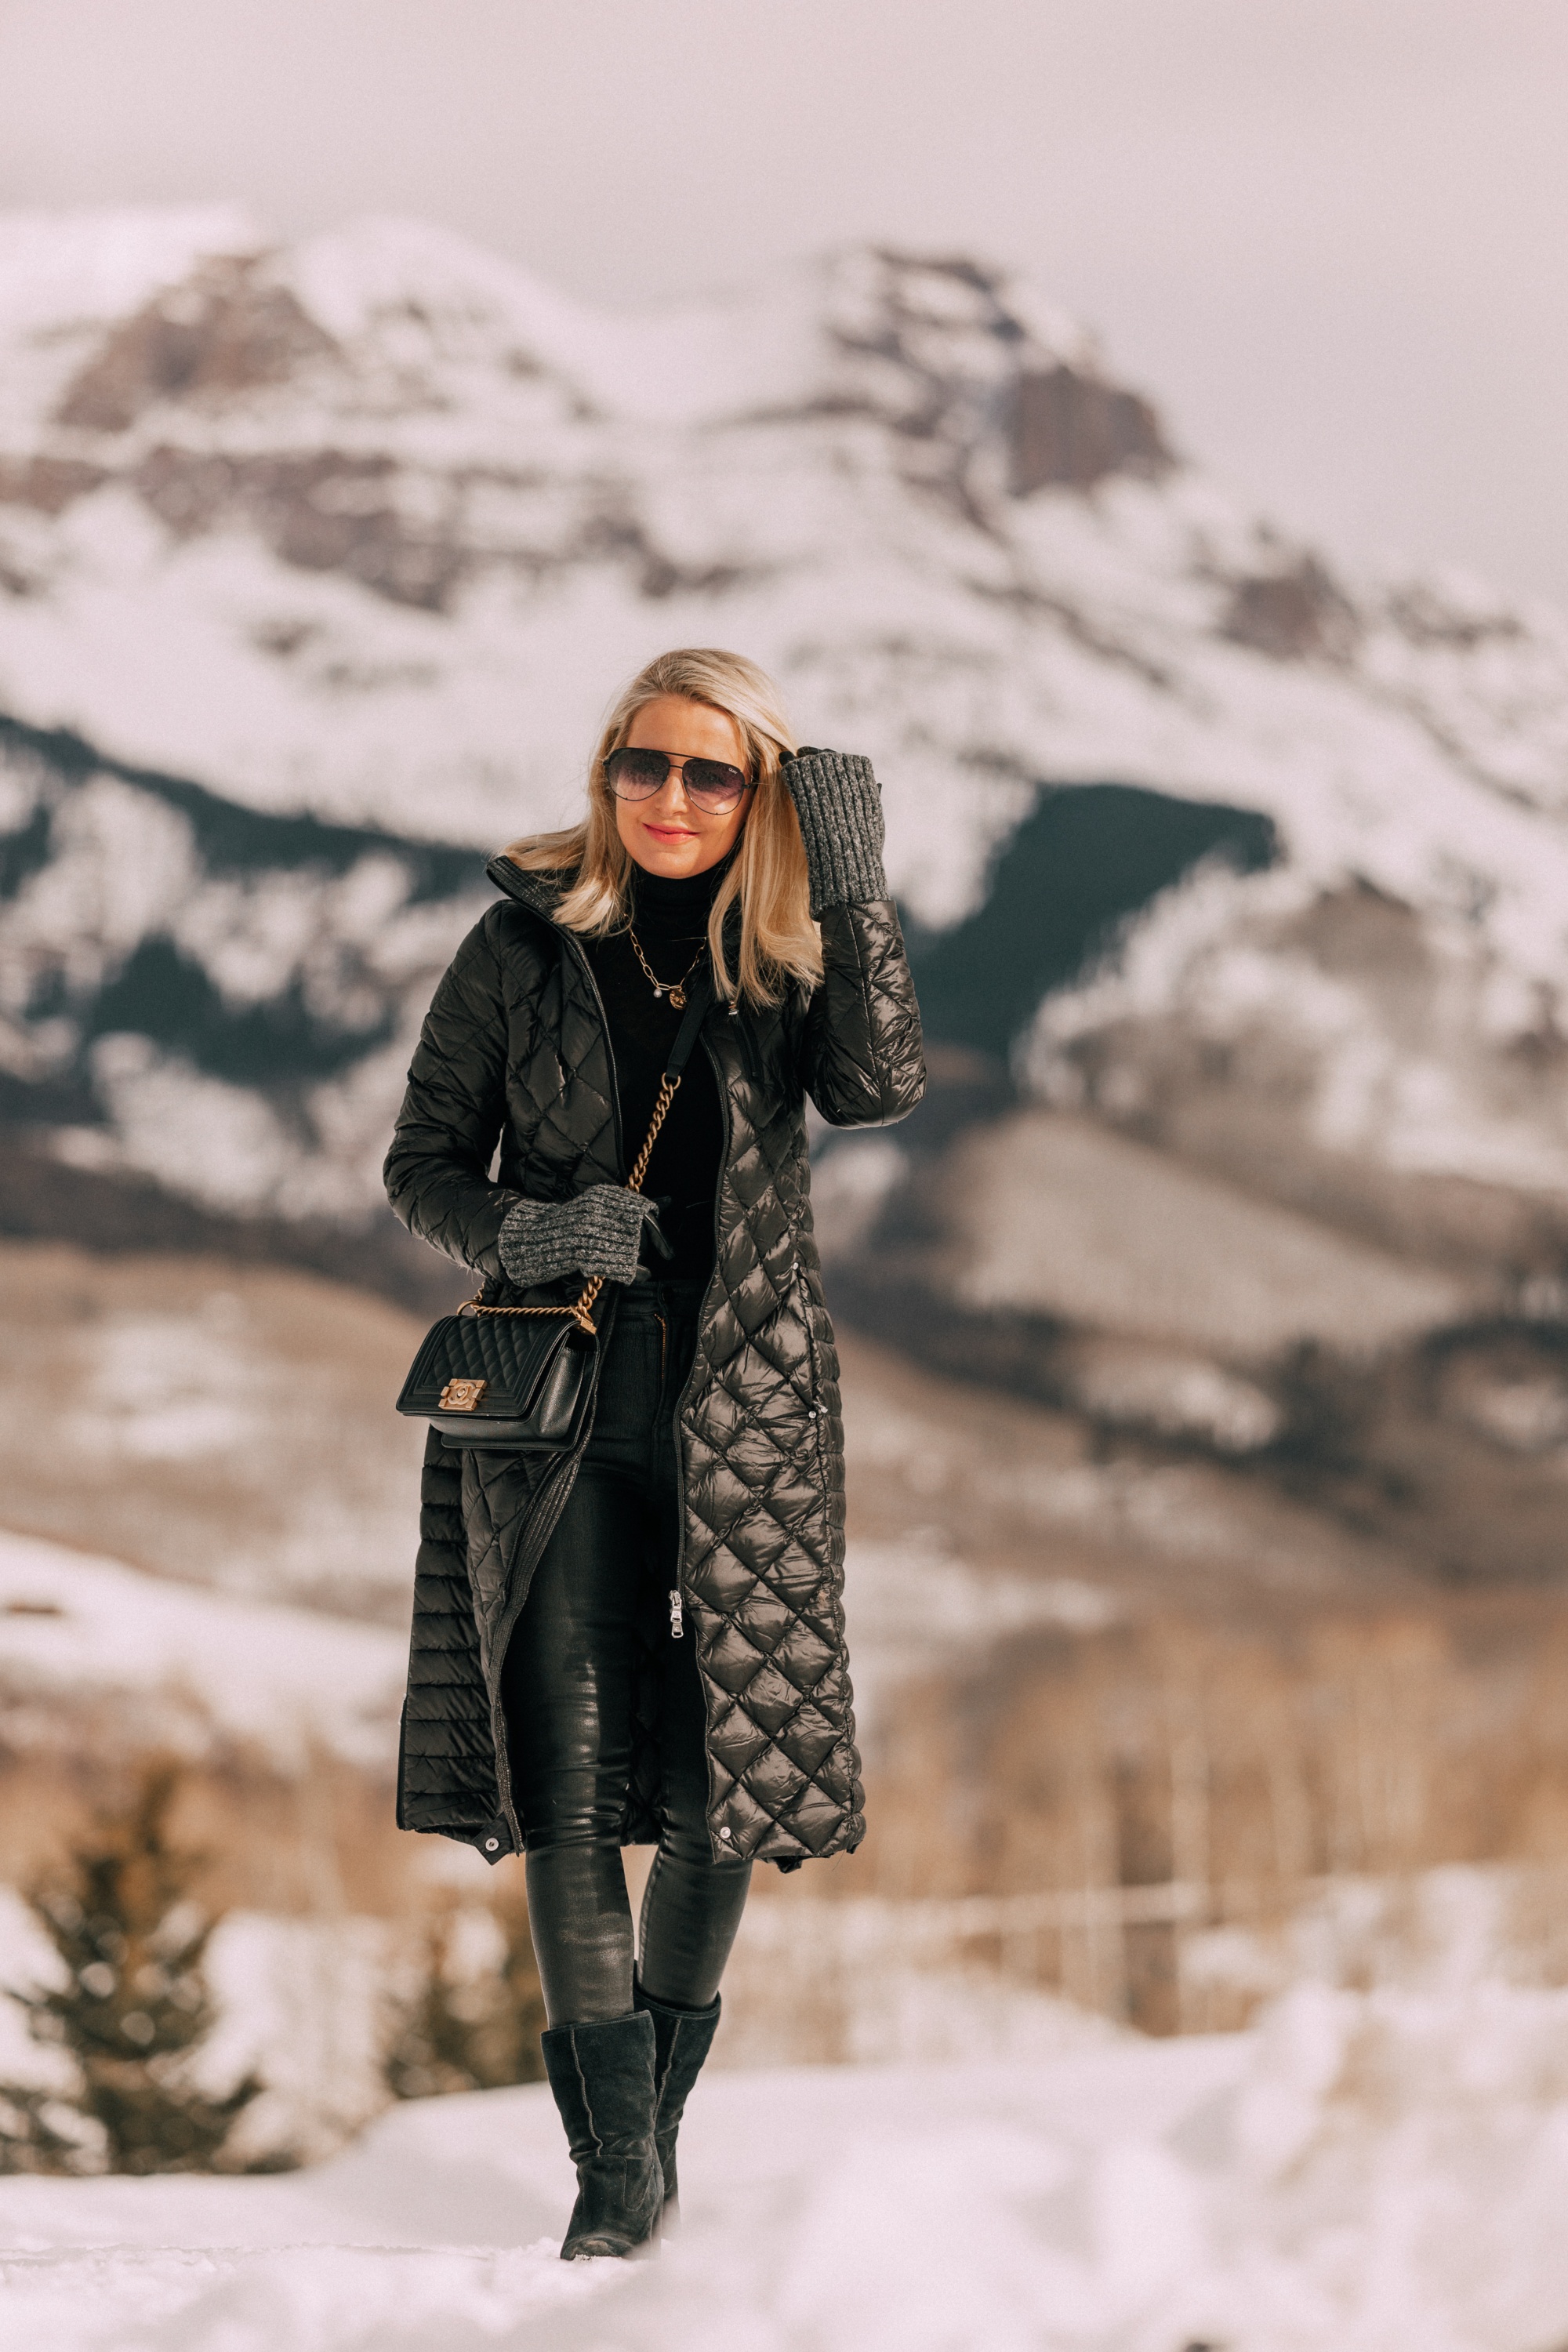 puffer coat outfit Fashion blogger wearing Herno puffer coat over black turtleneck sweater with Citizens of Humanity Rocket leatherette skinny jeans, Ugg wedge boots in Telluride, CO